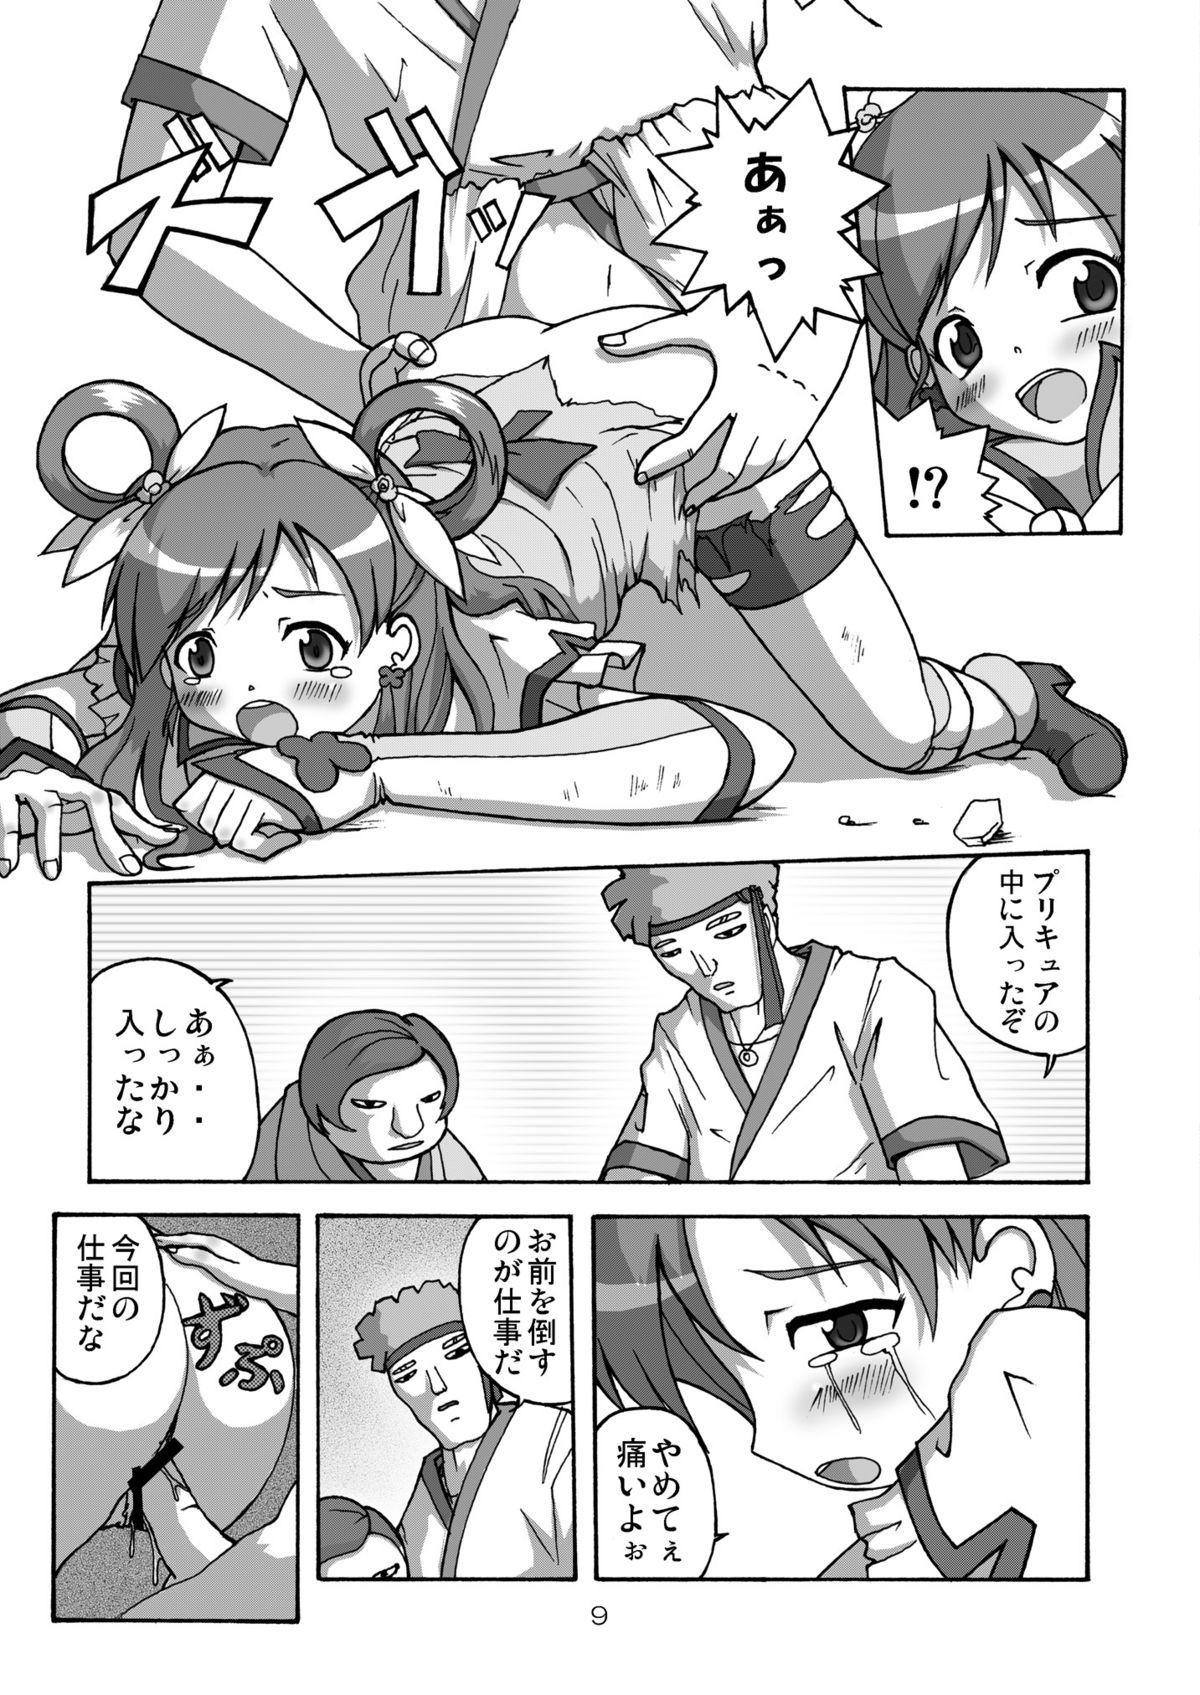 Youporn Bara no senshi-tachi | Fighter of Rose - Pretty cure Yes precure 5 Thot - Page 9